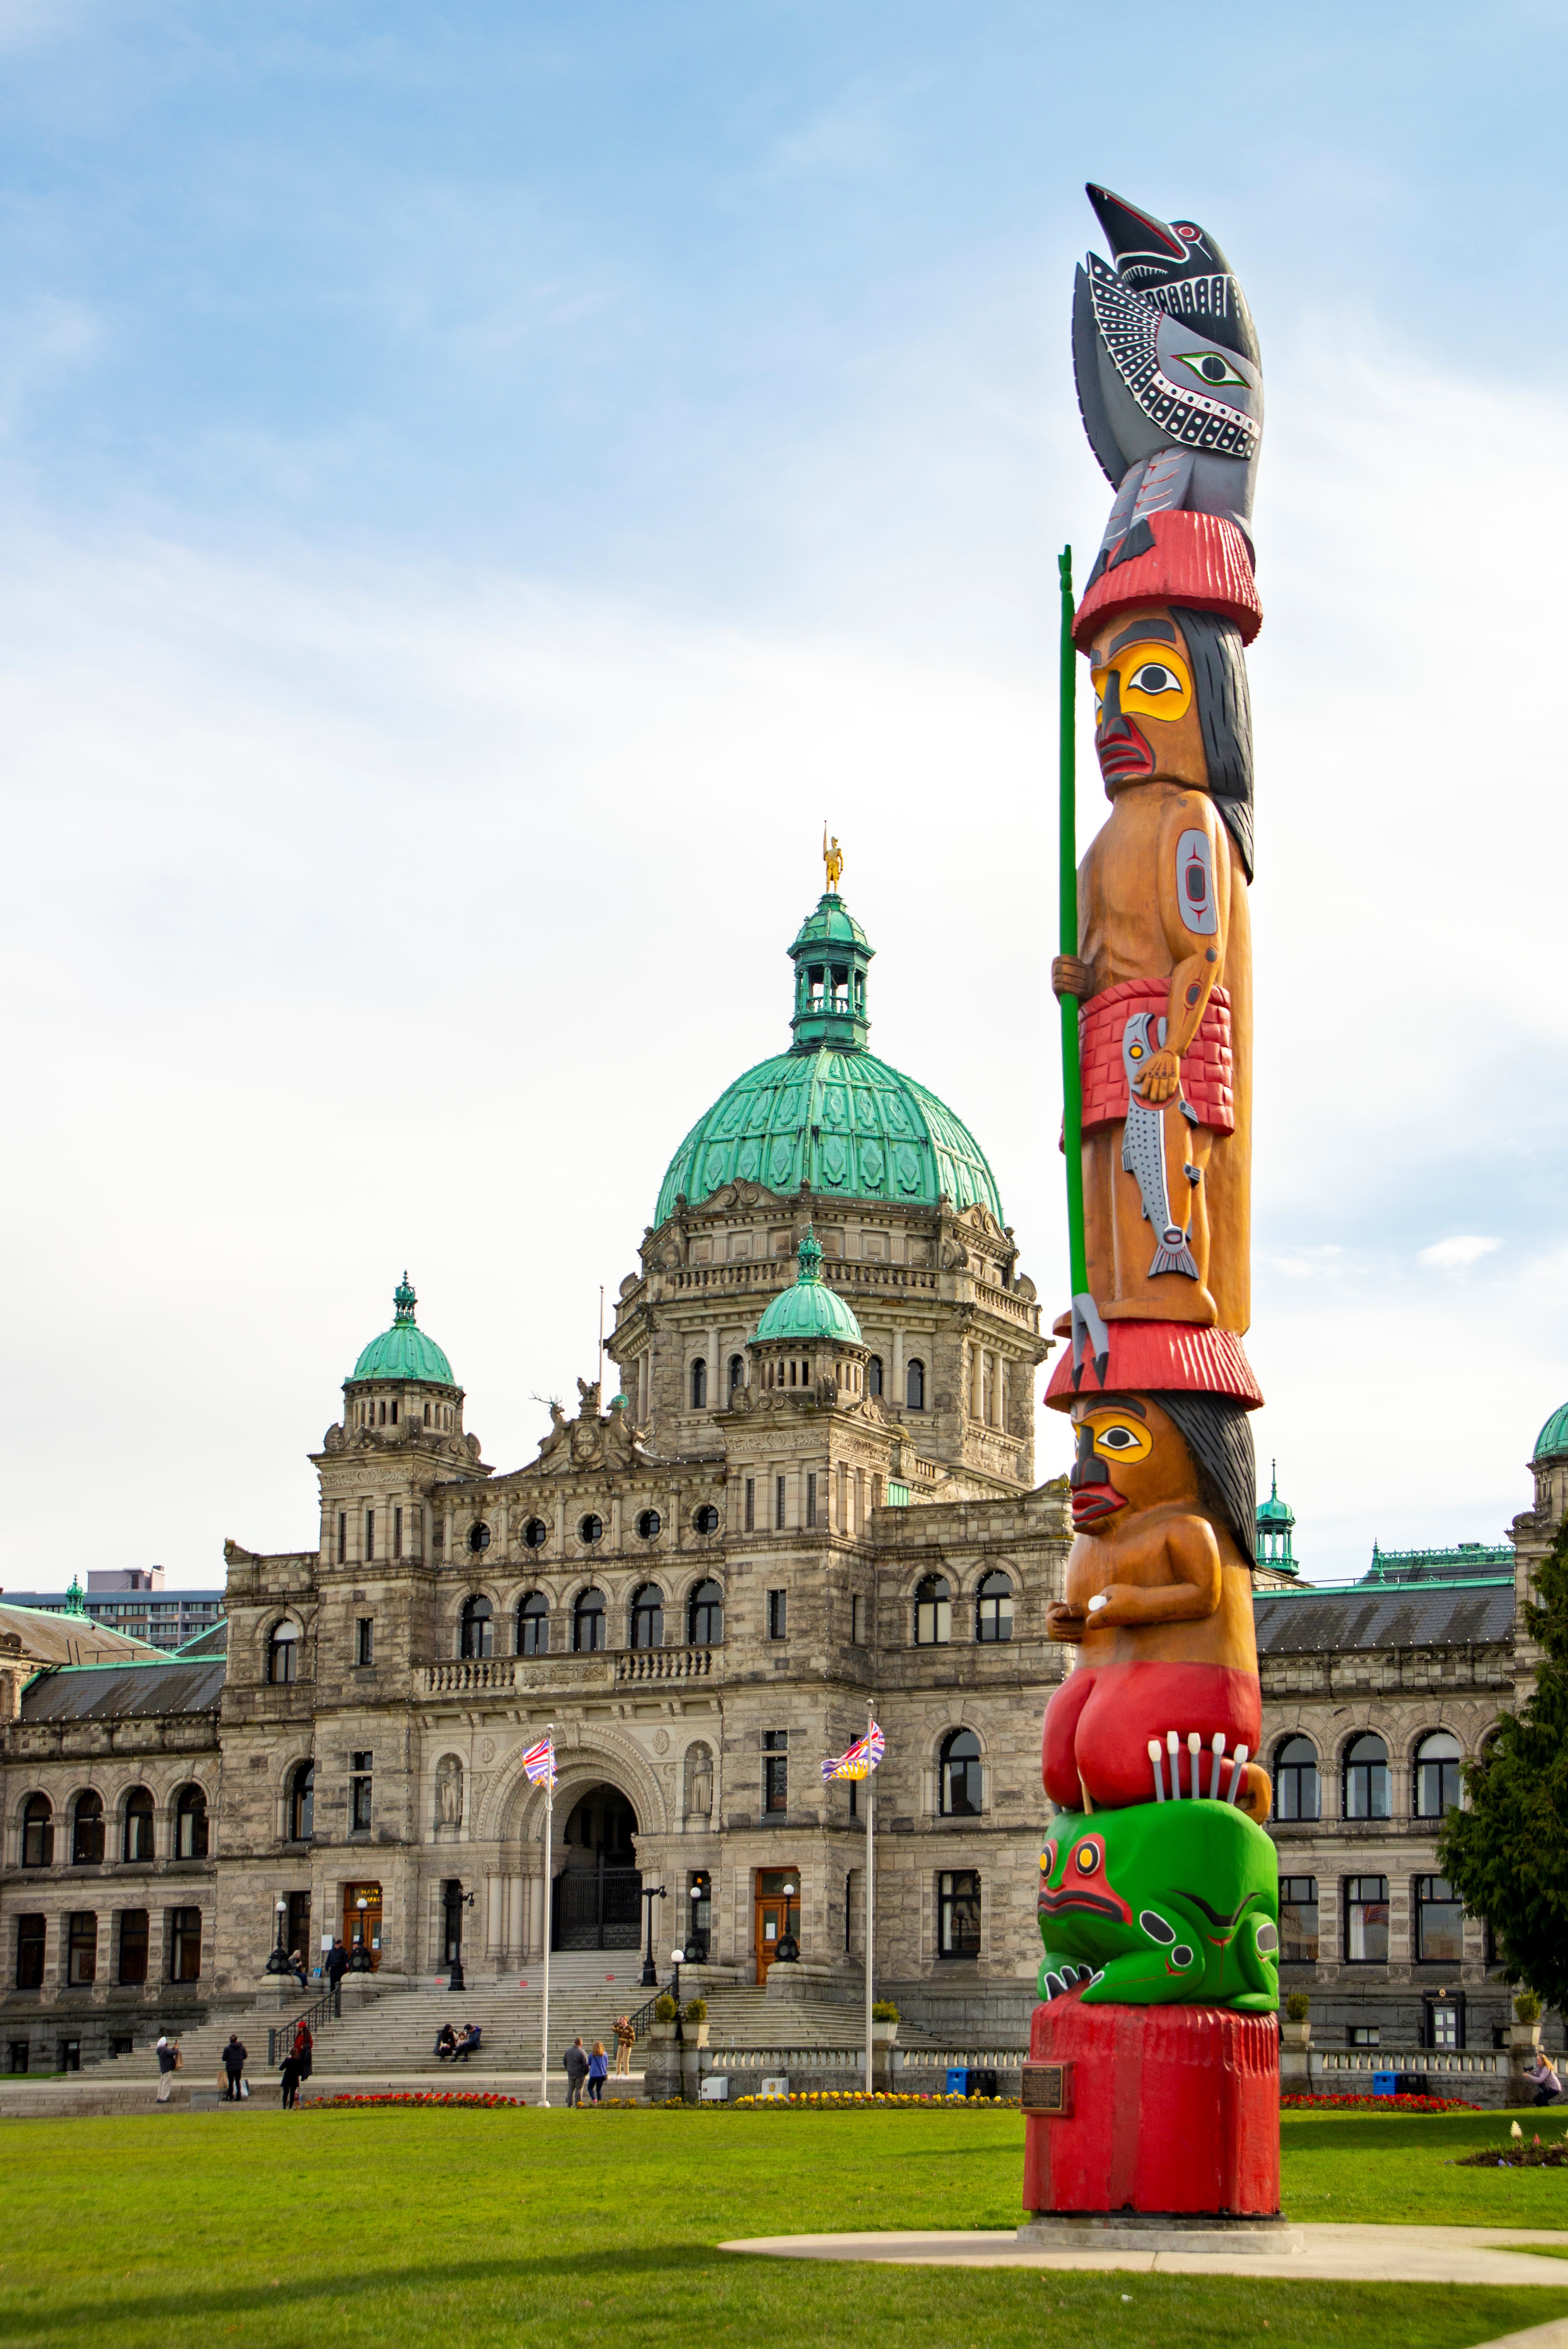 Update Totem Pole Photo with Building.jpg